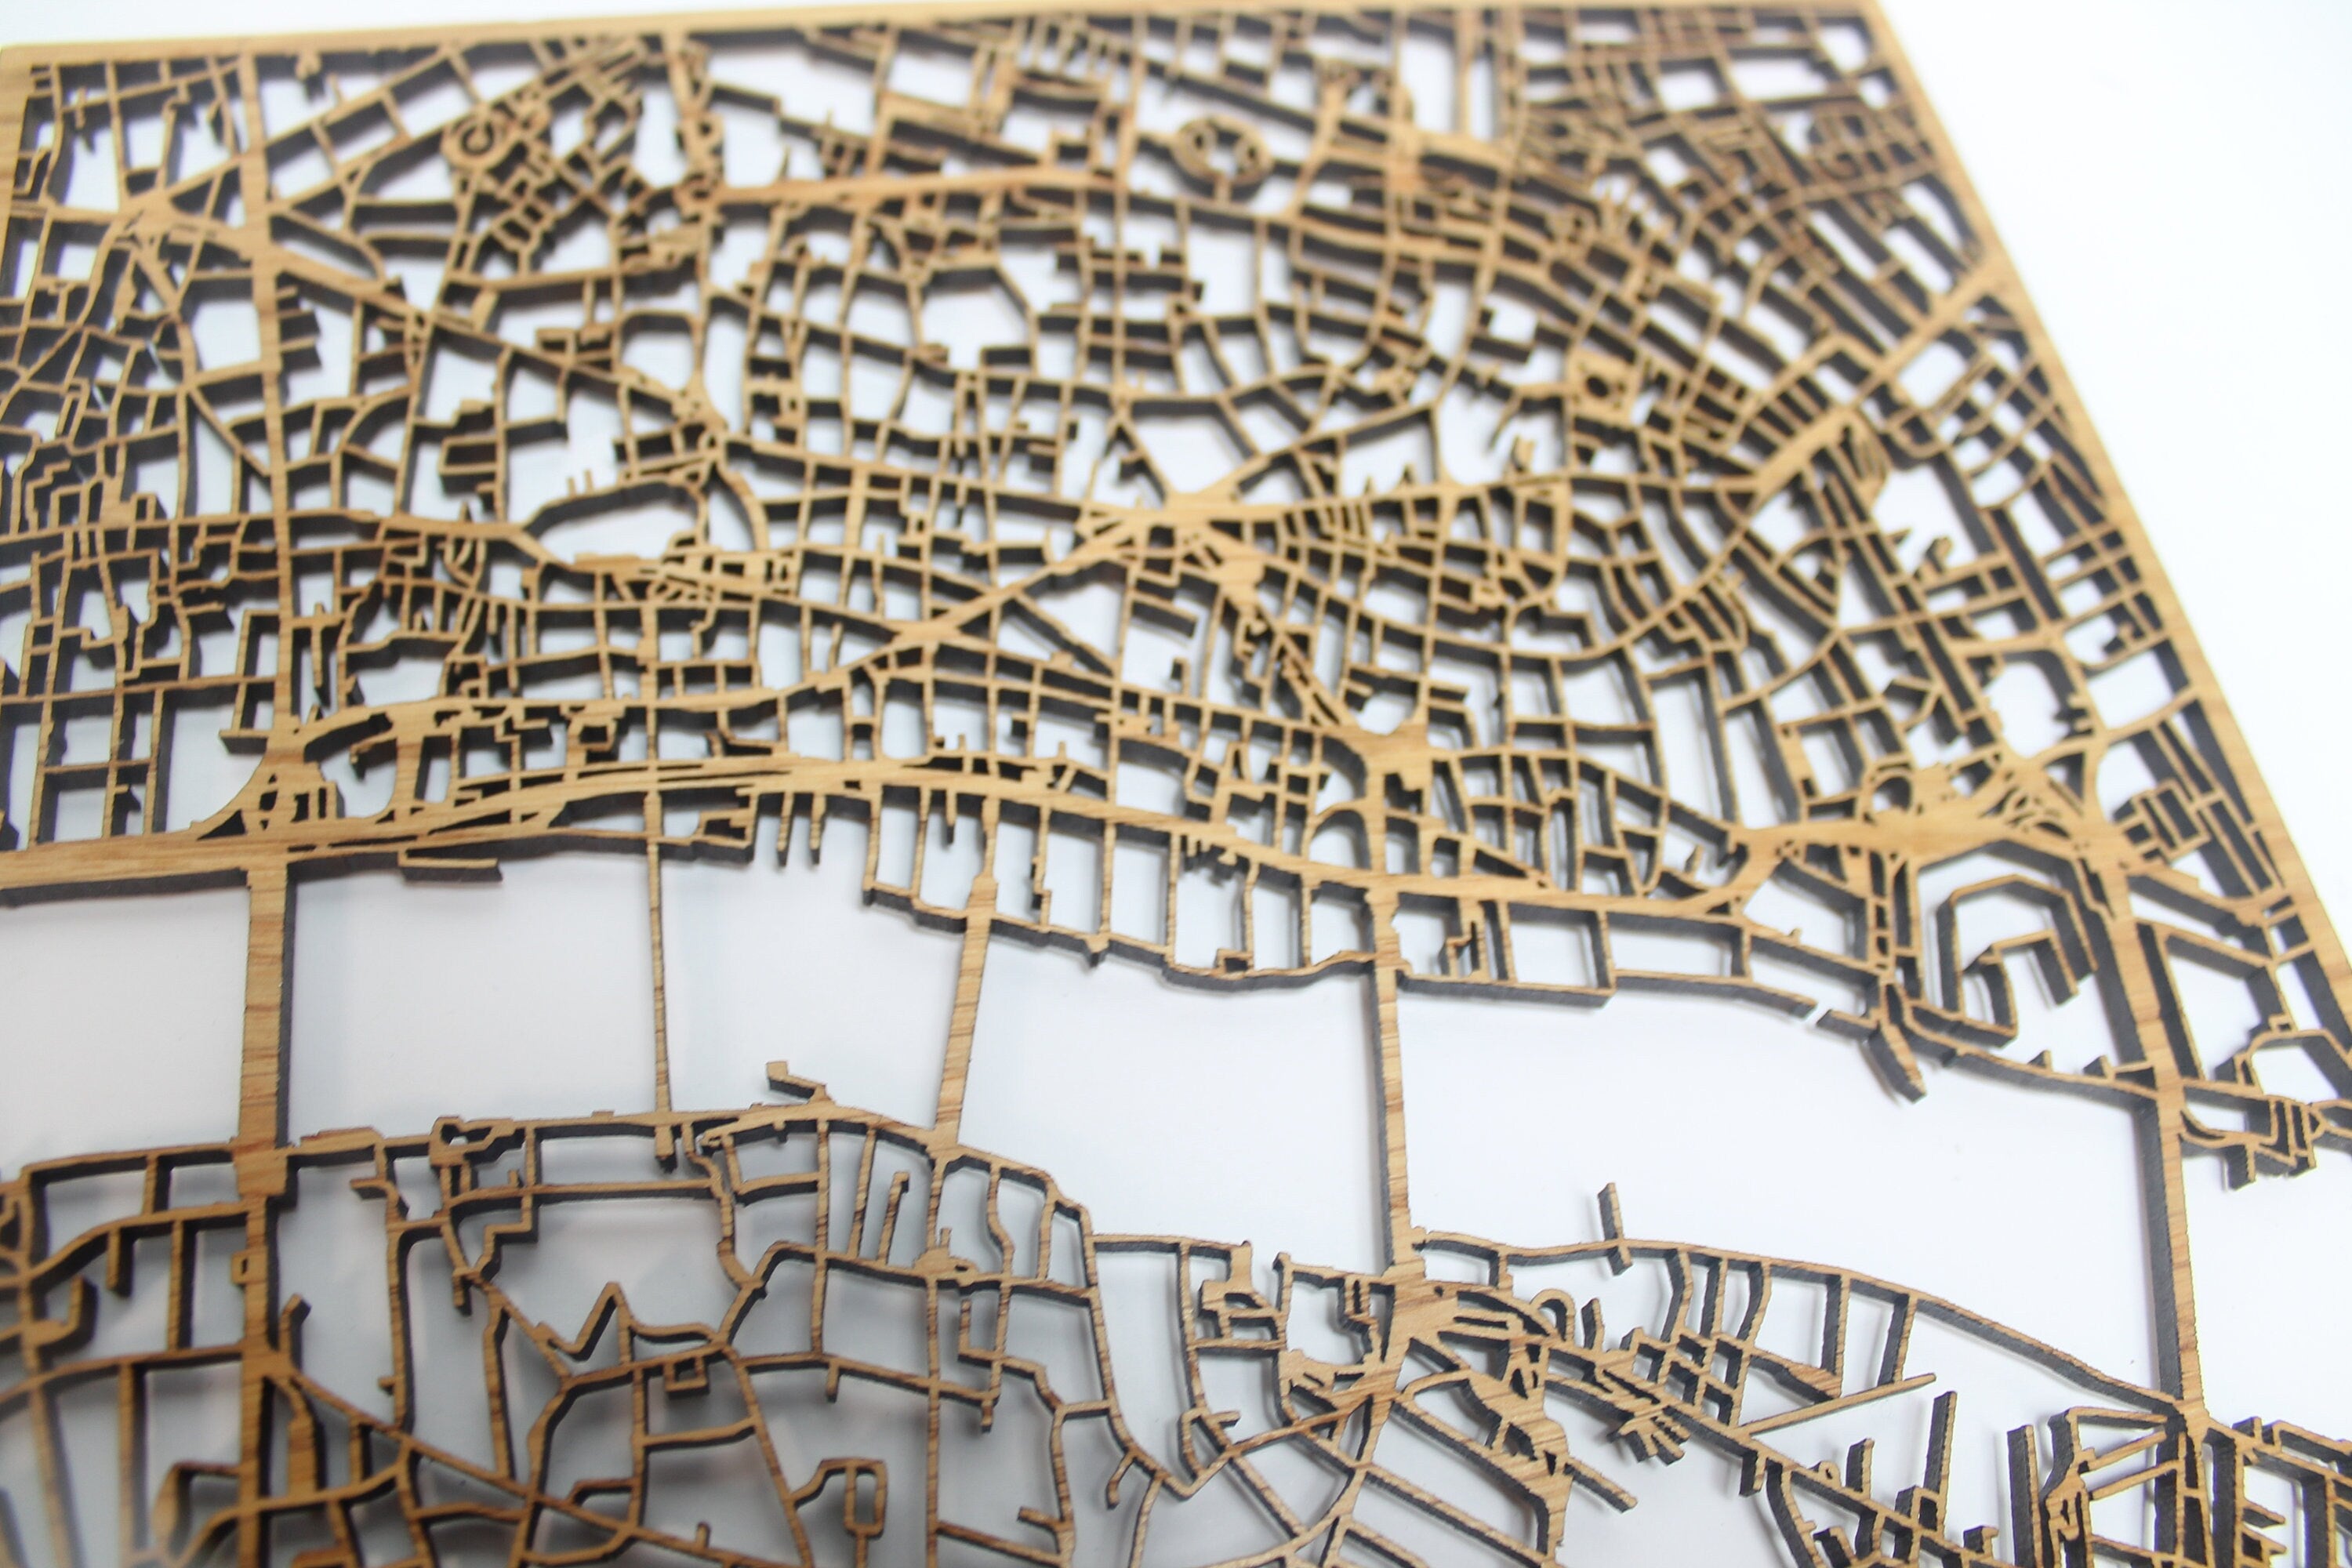 City of London Solid Wood Street Map Laser Cut Street Maps Wooden Map